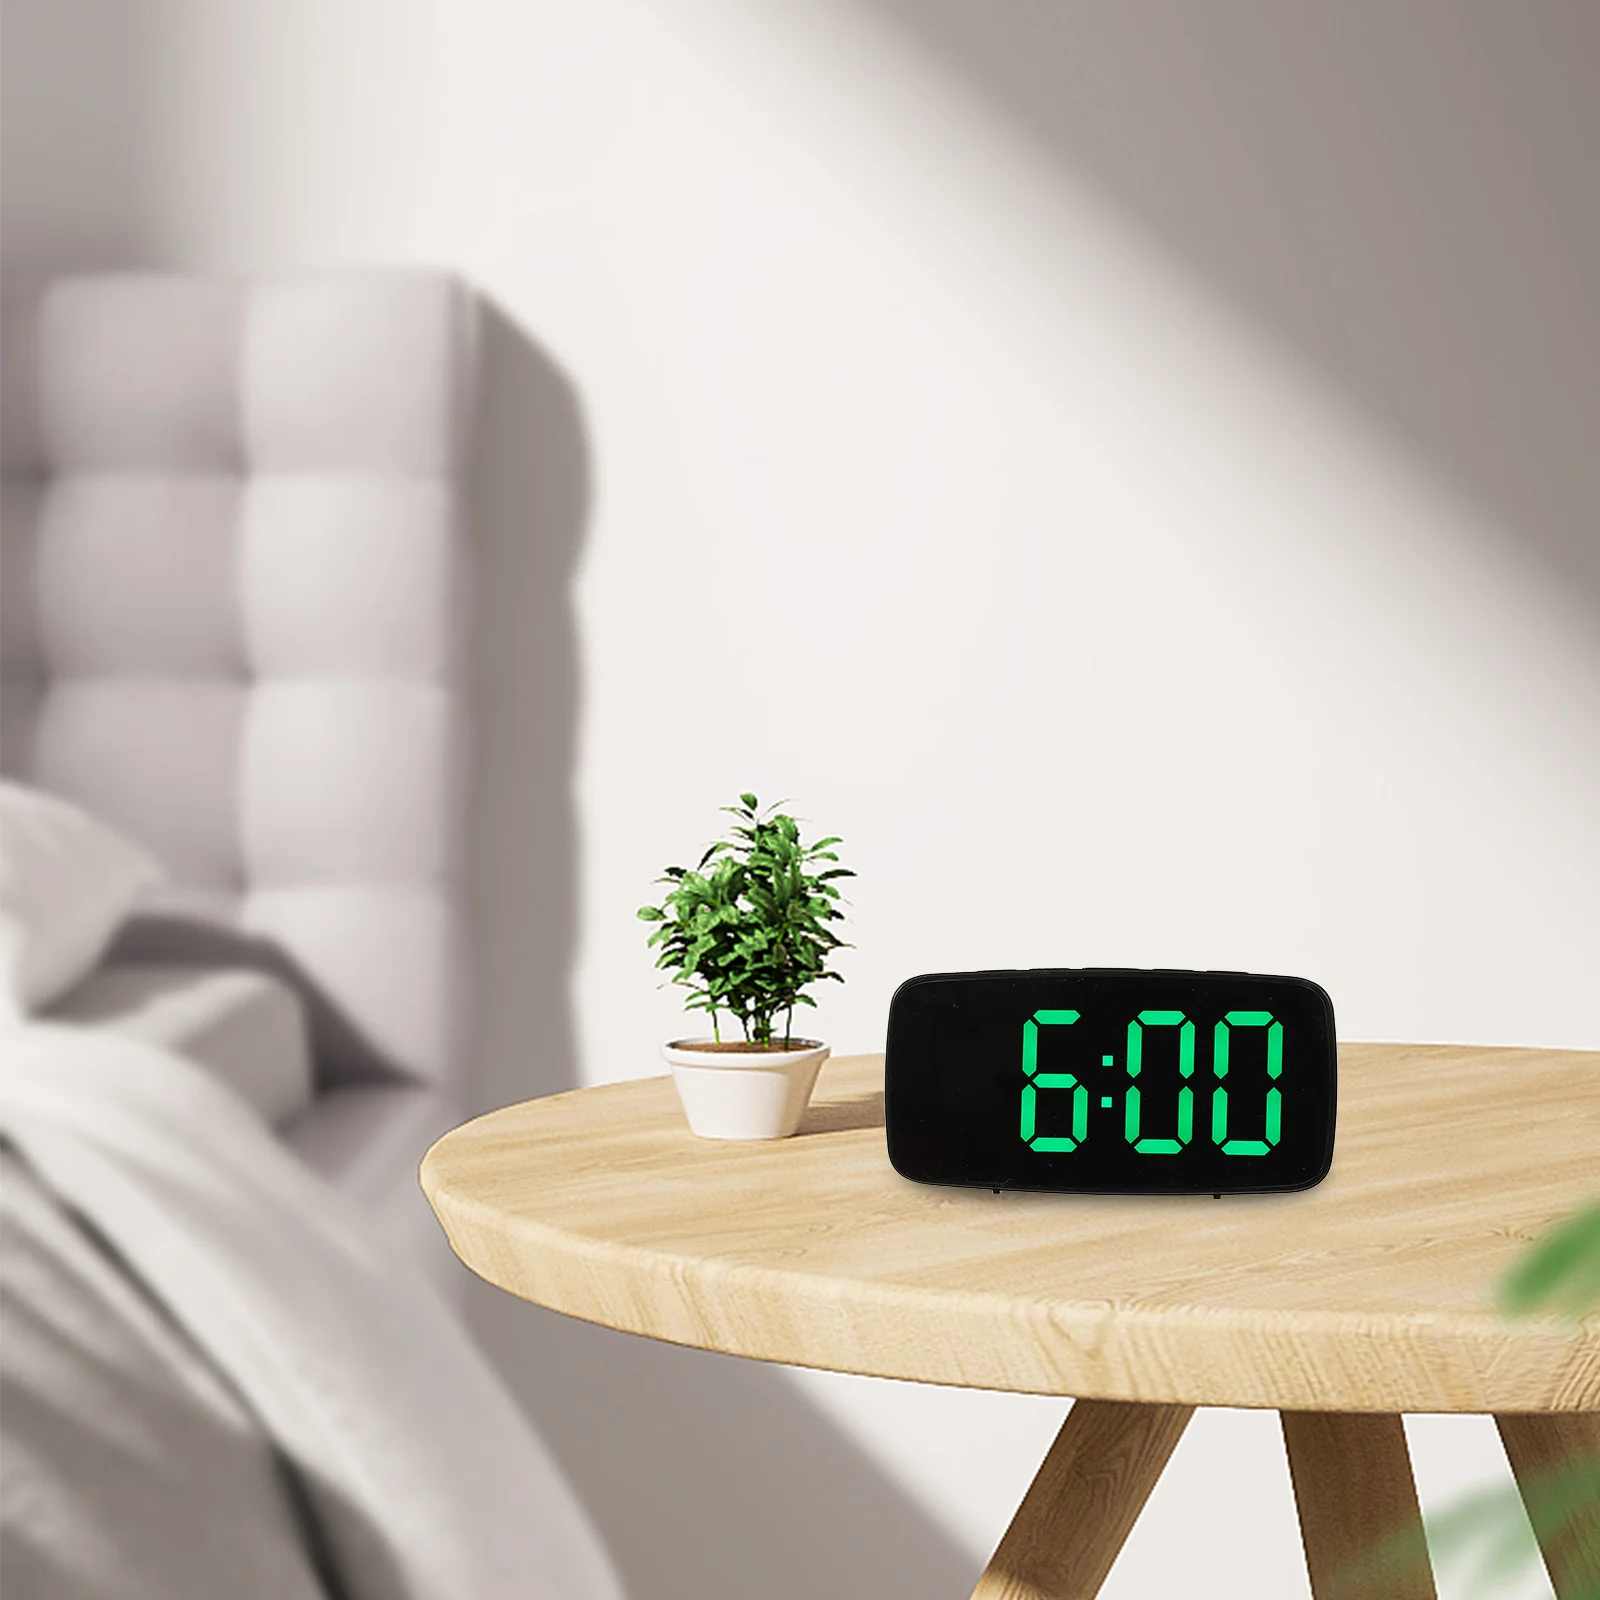 

LED Electronic Alarm Clock Large Number Digital Alarms Cool Electric Clocks Bedrooms Big Numbers Components Travel Small Desk